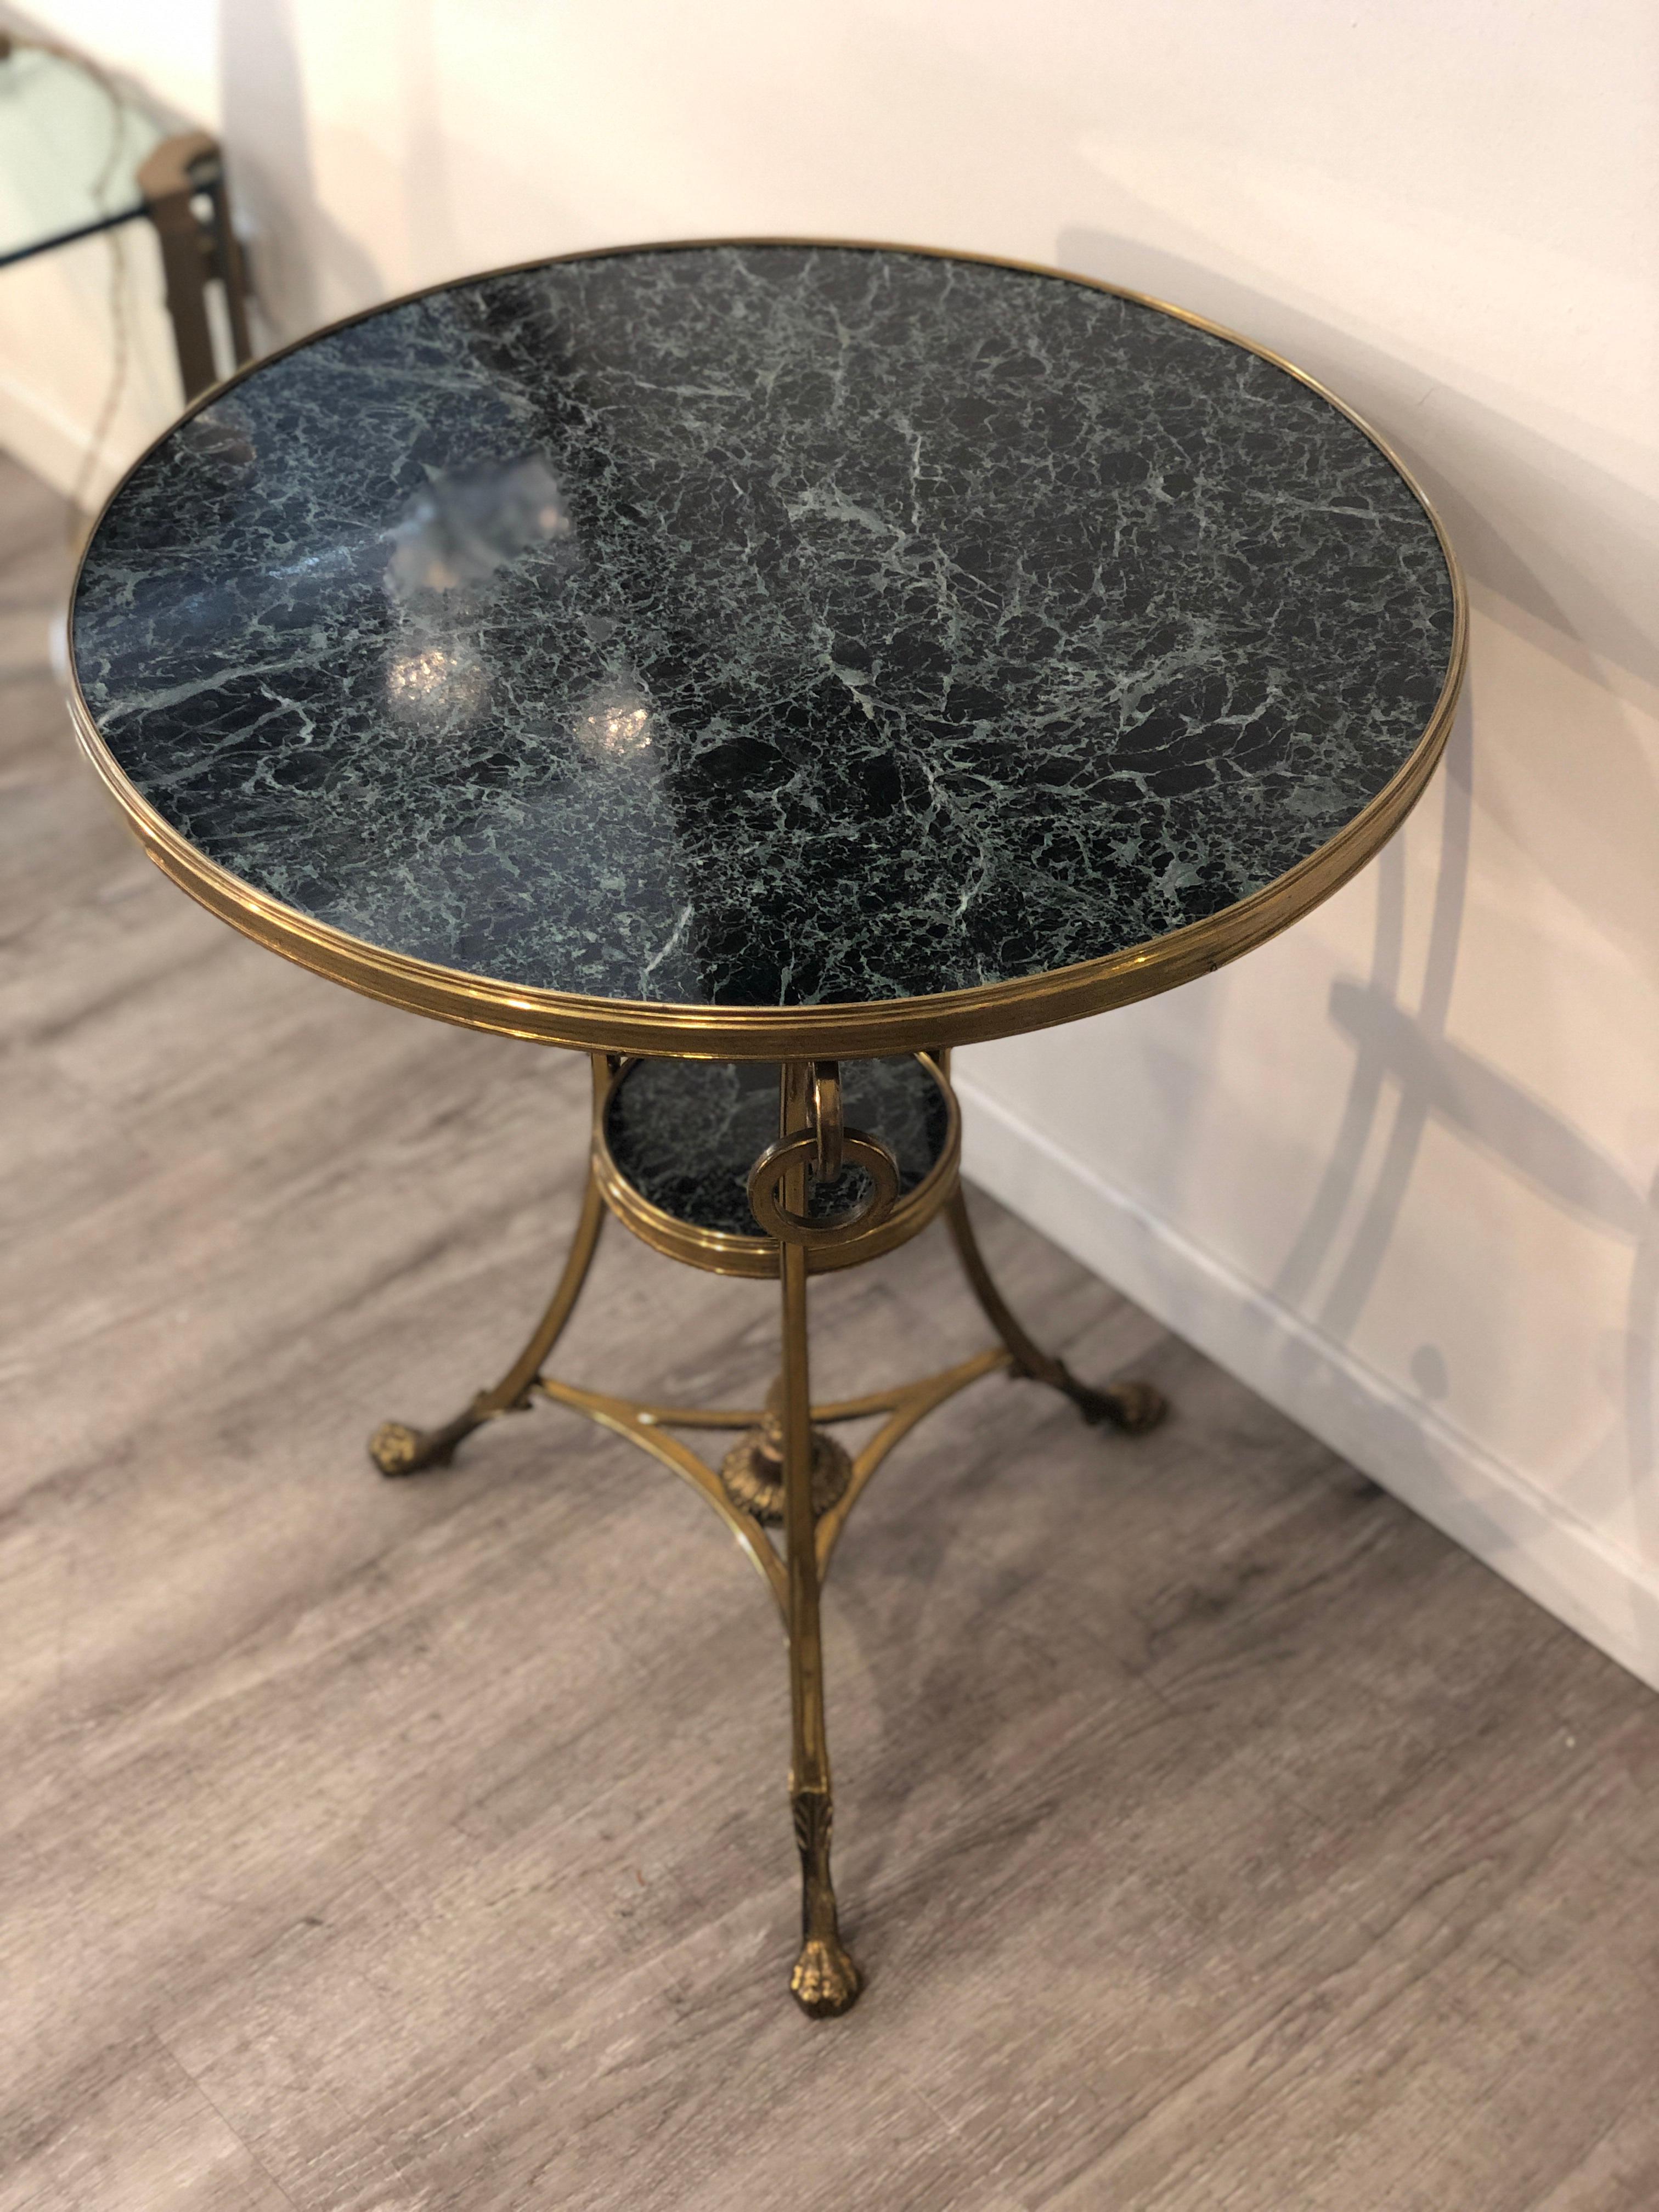 Brass and green alps marble rounded gueridon small table from France from mid century. Empire style and details such as pine cones and lion ending legs.
It features three bronze rings hang on the top where the legs end. This table features two tops